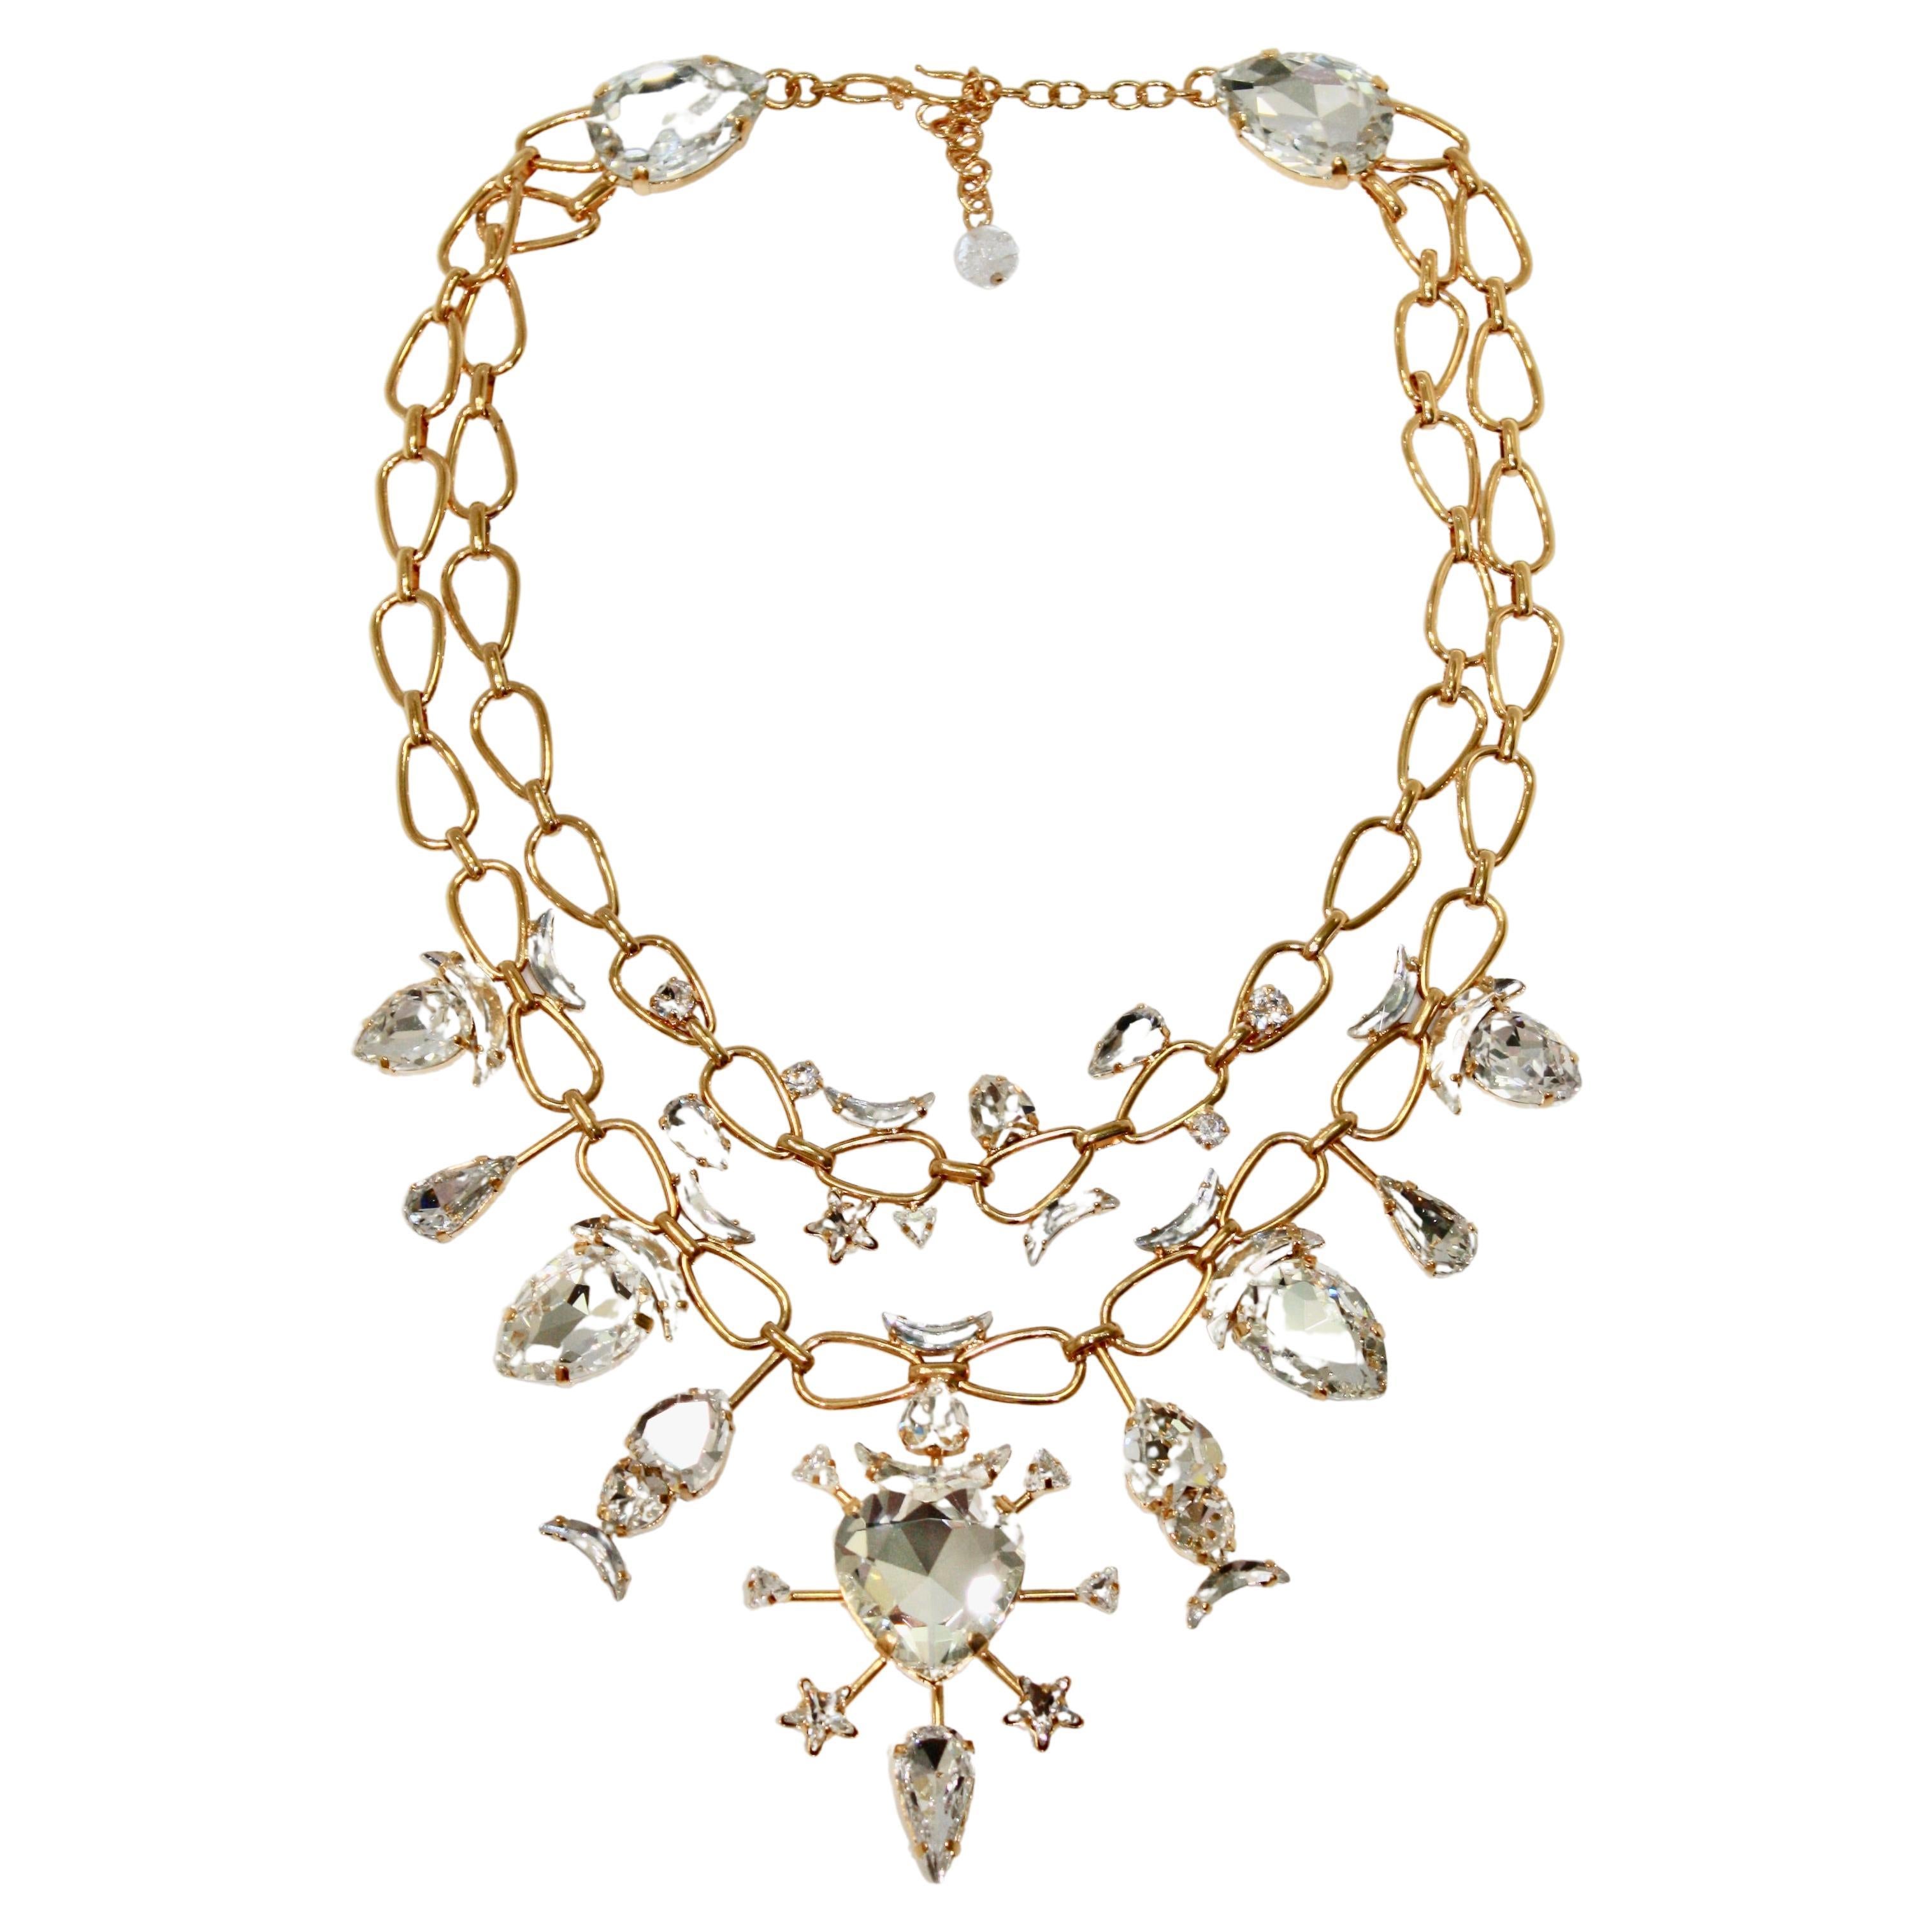 Philippe Ferrandis Crystal and Gold Unique Choker.